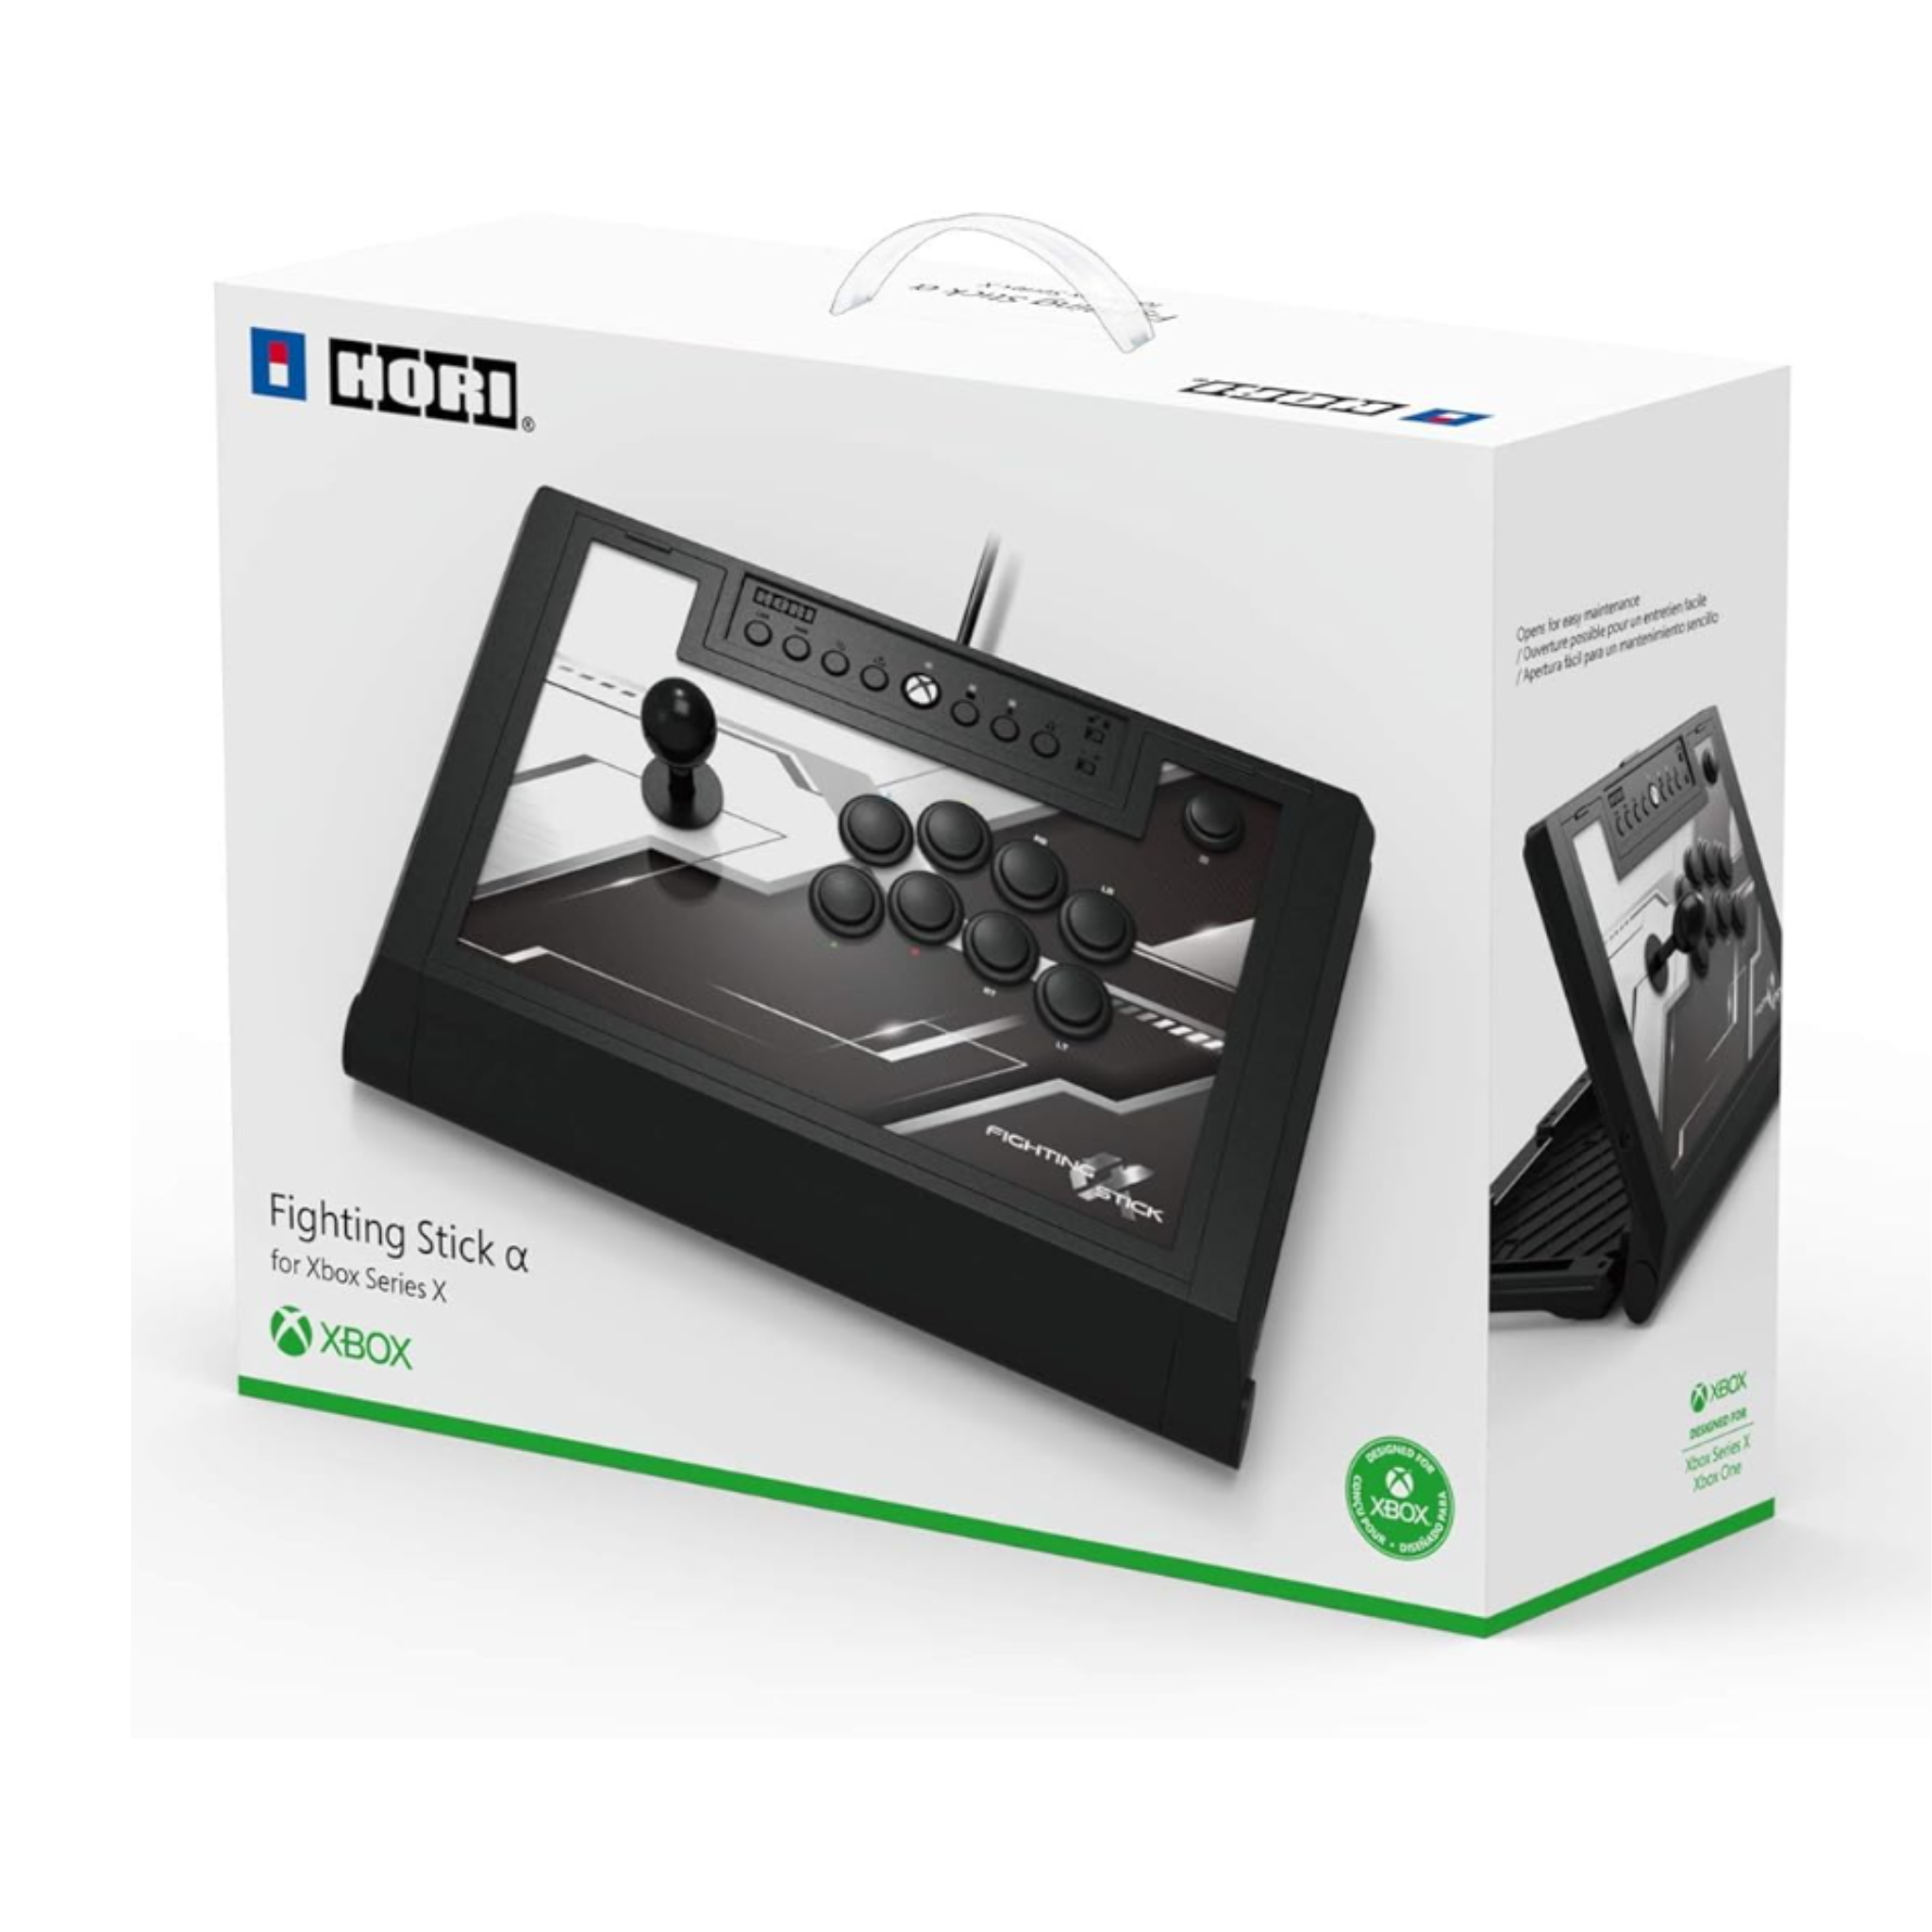 Image of Hori Fighting stick for Xbox Series X